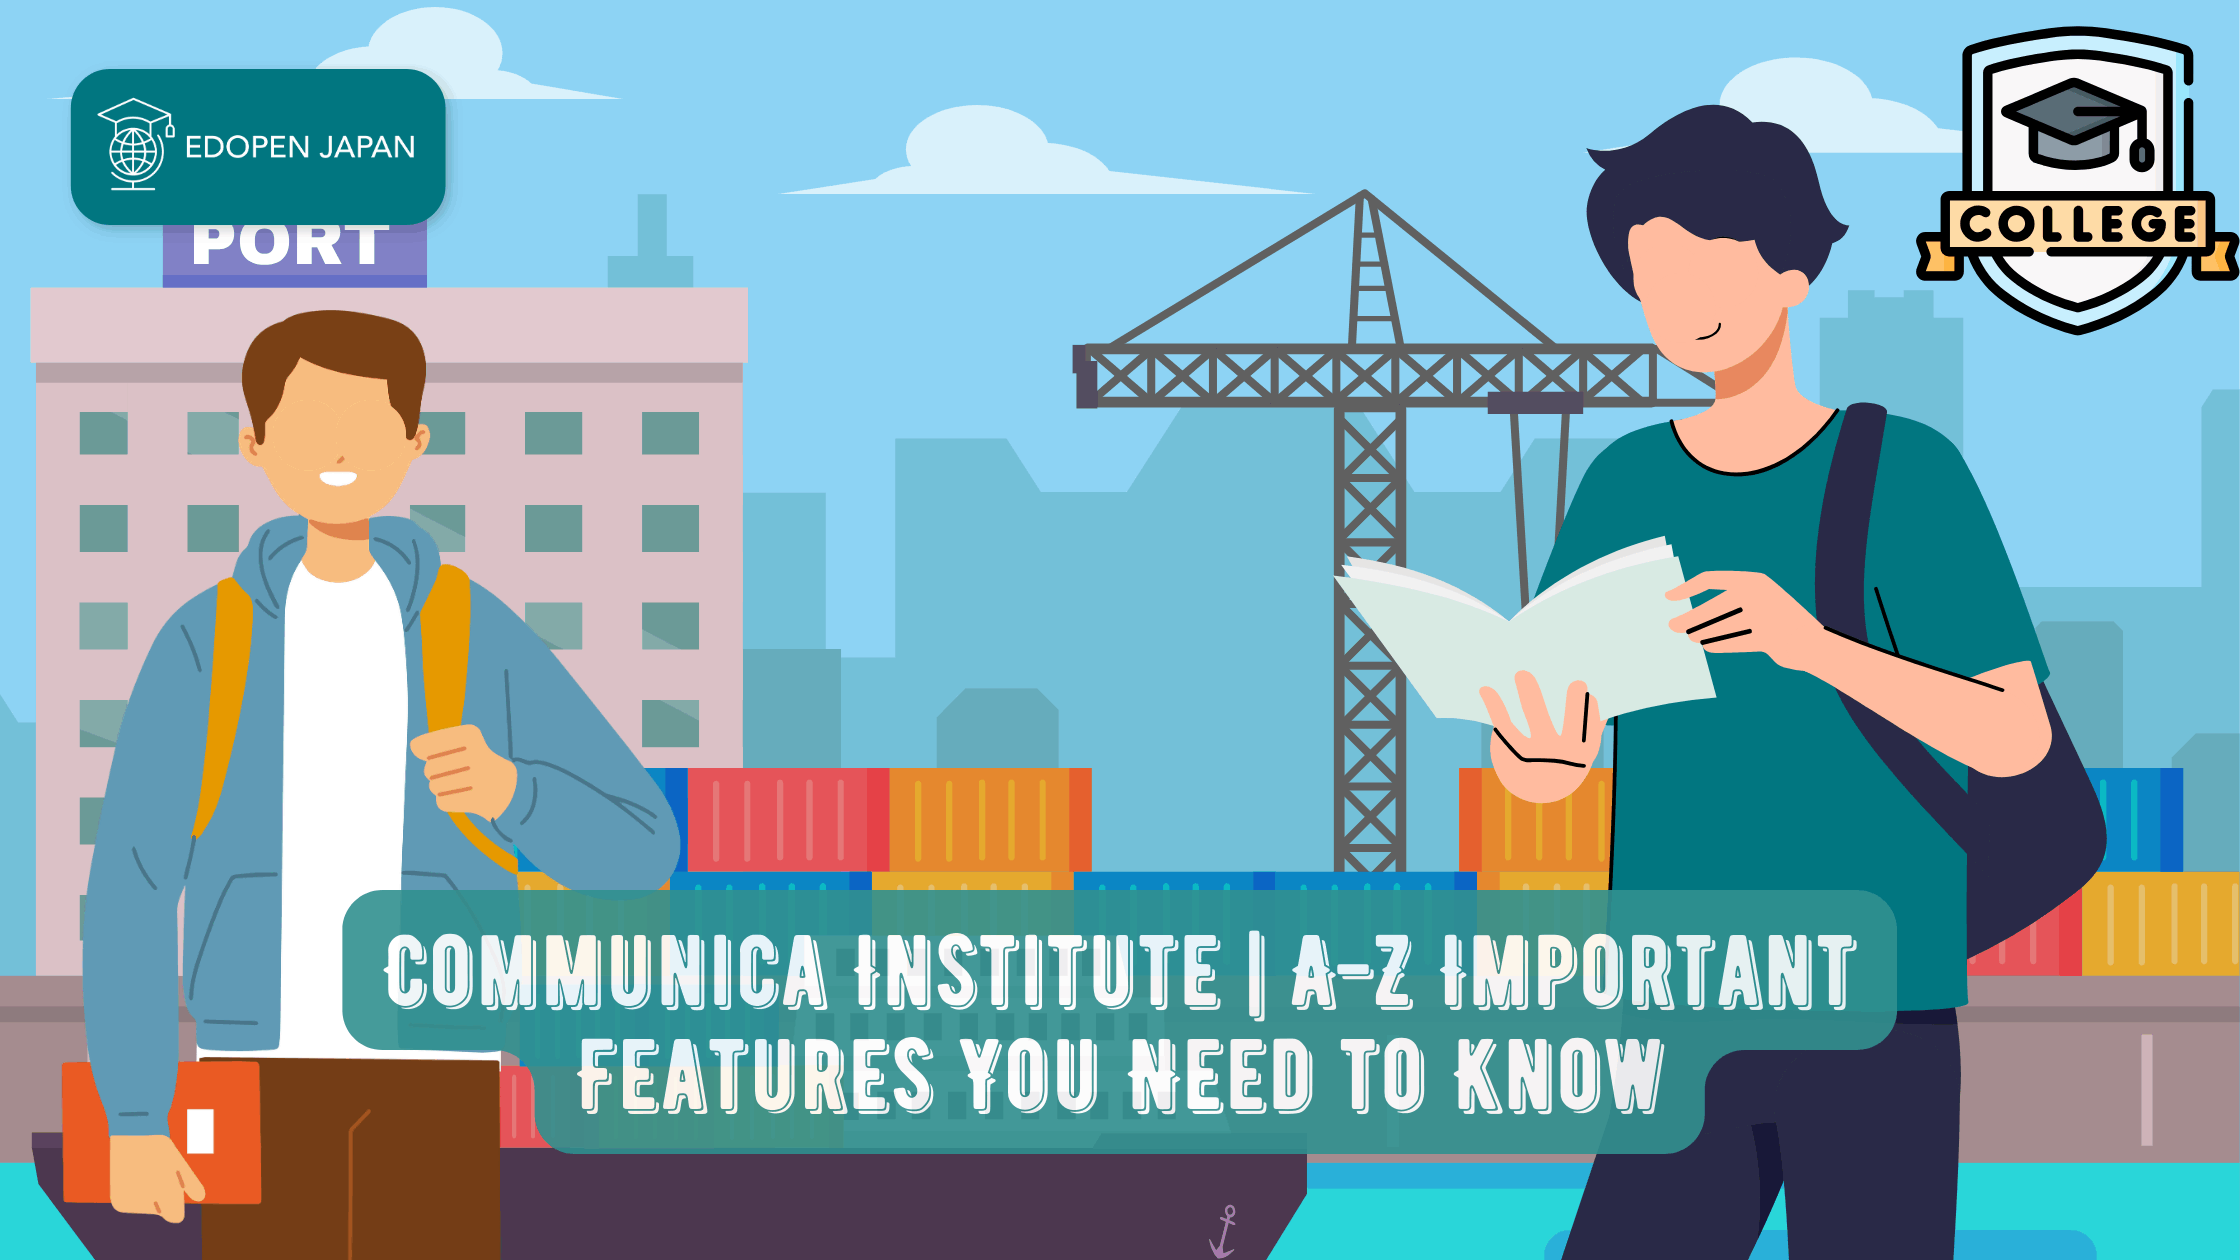 Communica Institute | A-Z Important Features You Need to Know - EDOPEN Japan